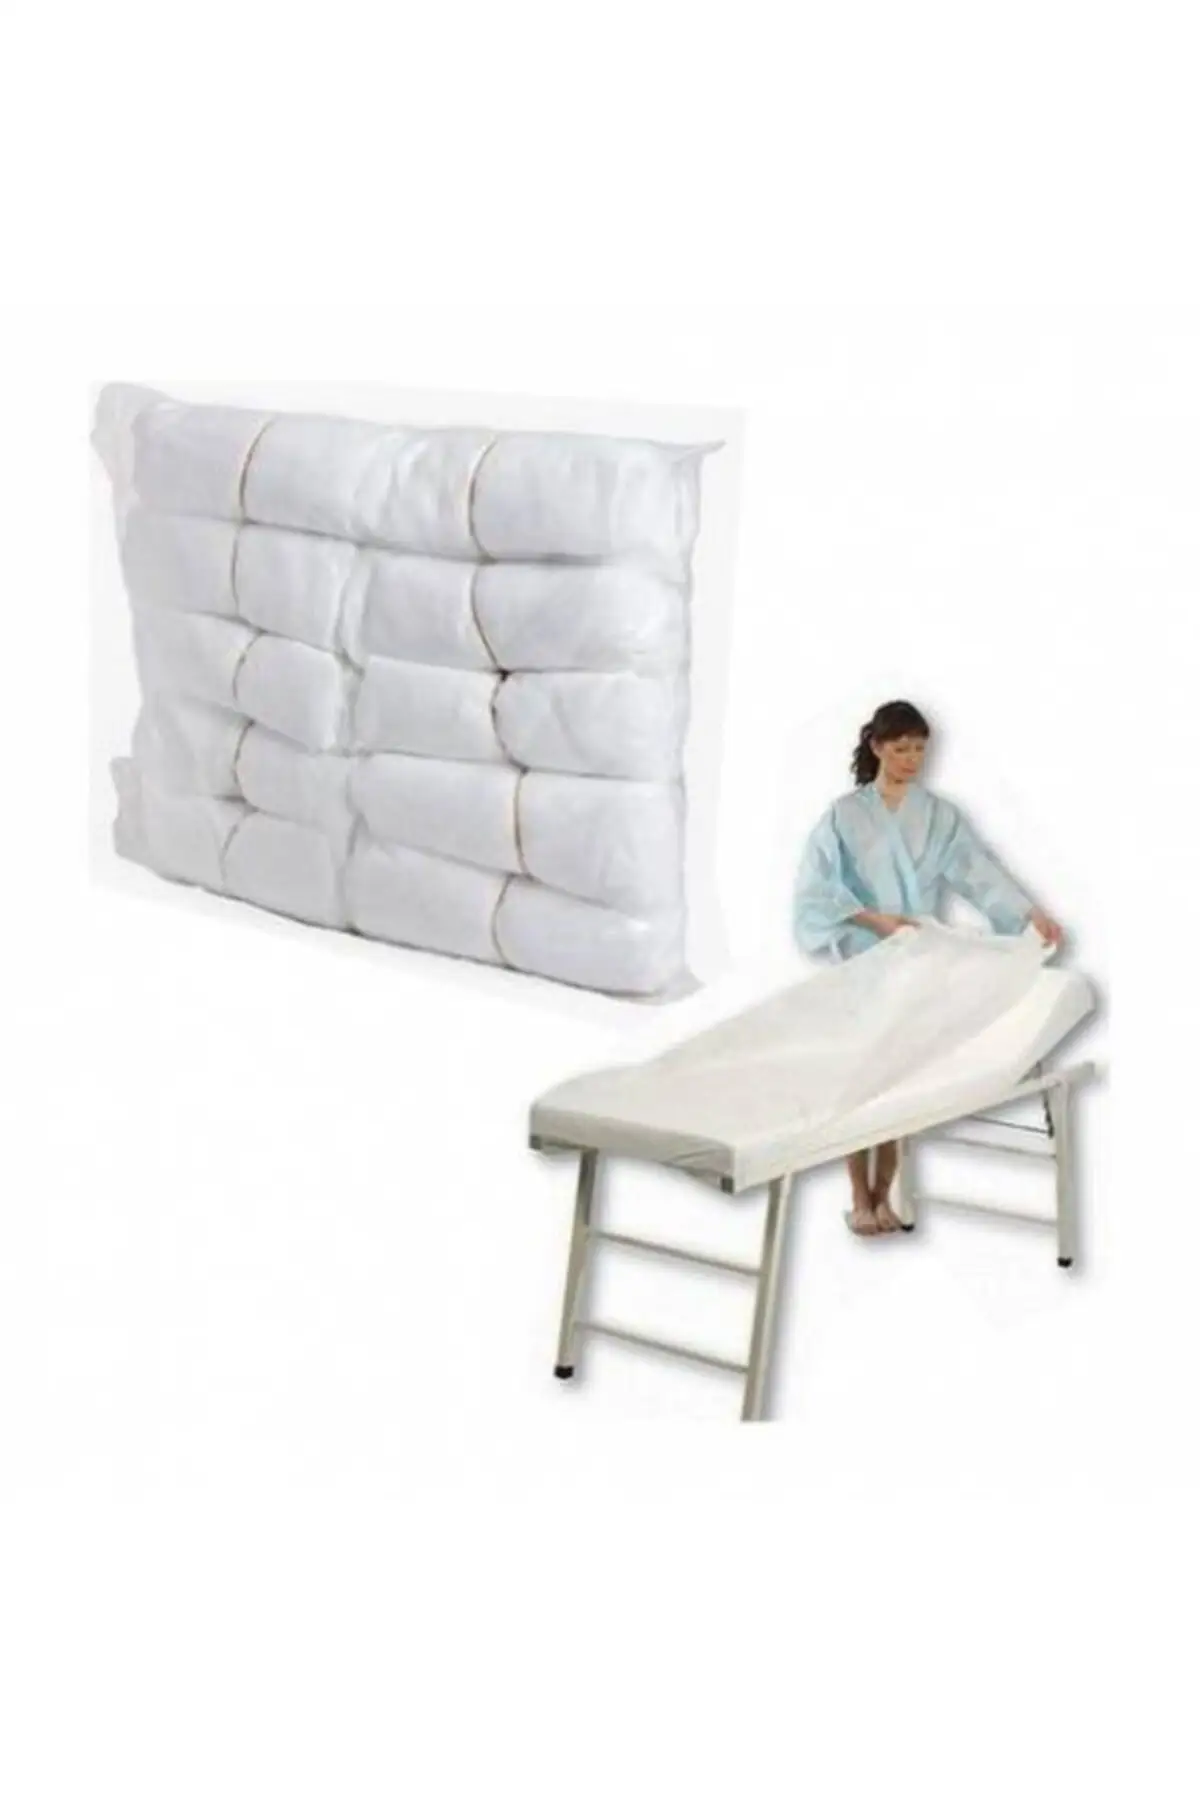 

Disposable Stretcher Cover 50 Pieces 220 Cm x 80 Cm Underpad Cover Fitted Massage Table Beauty Care Accessories SPA